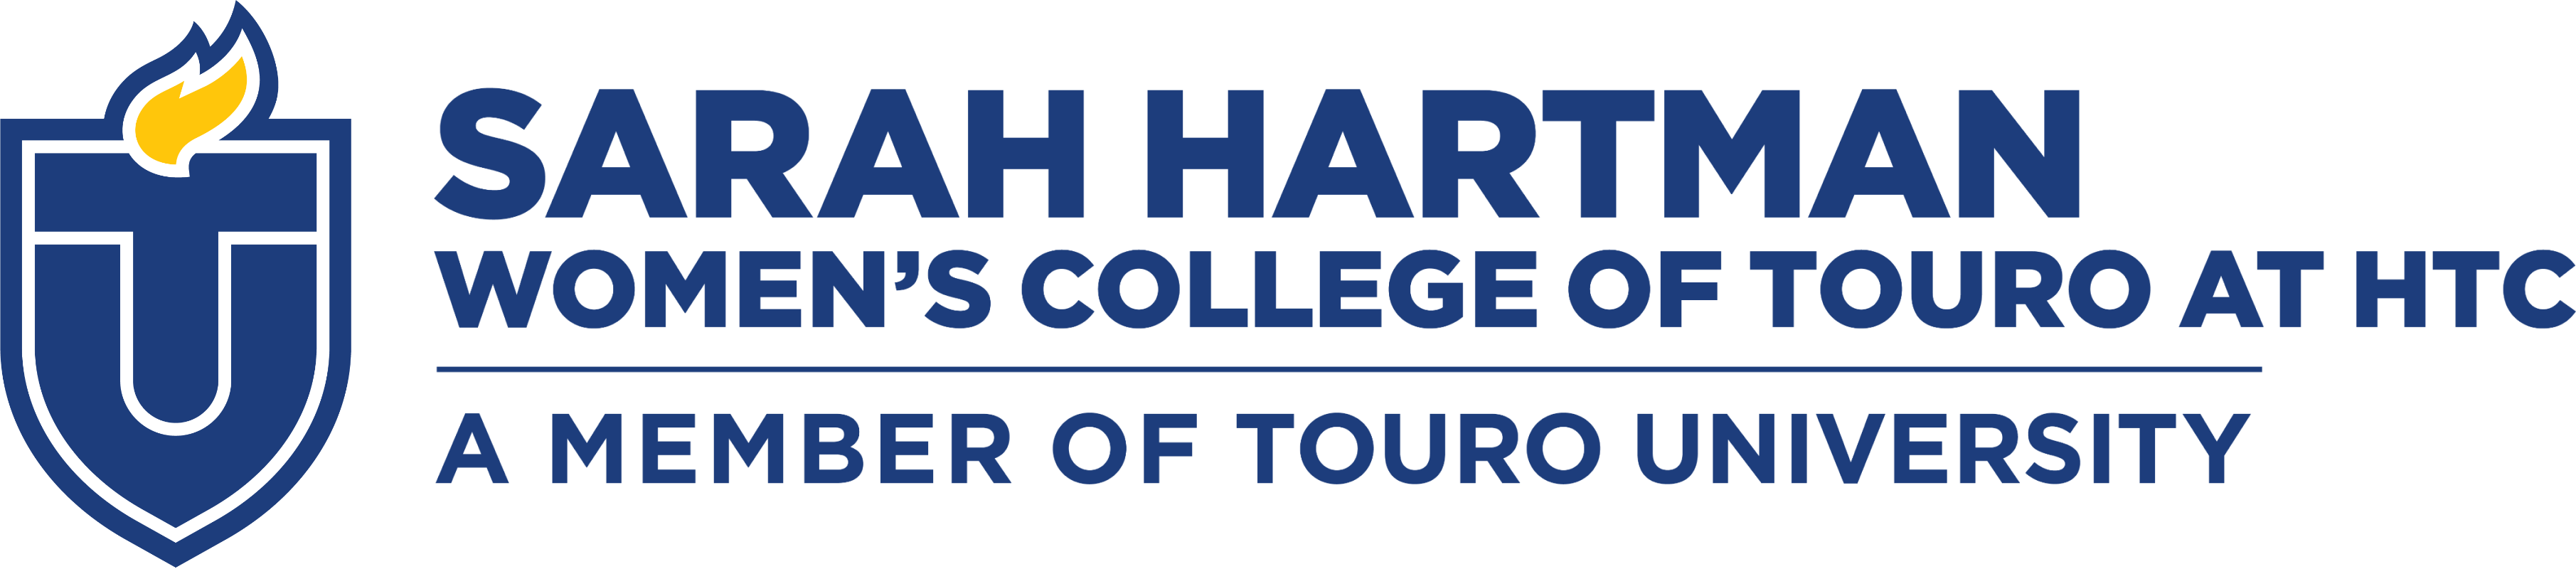 Hartman a Division of Hebrew Theological College a Member of the Touro College & University System